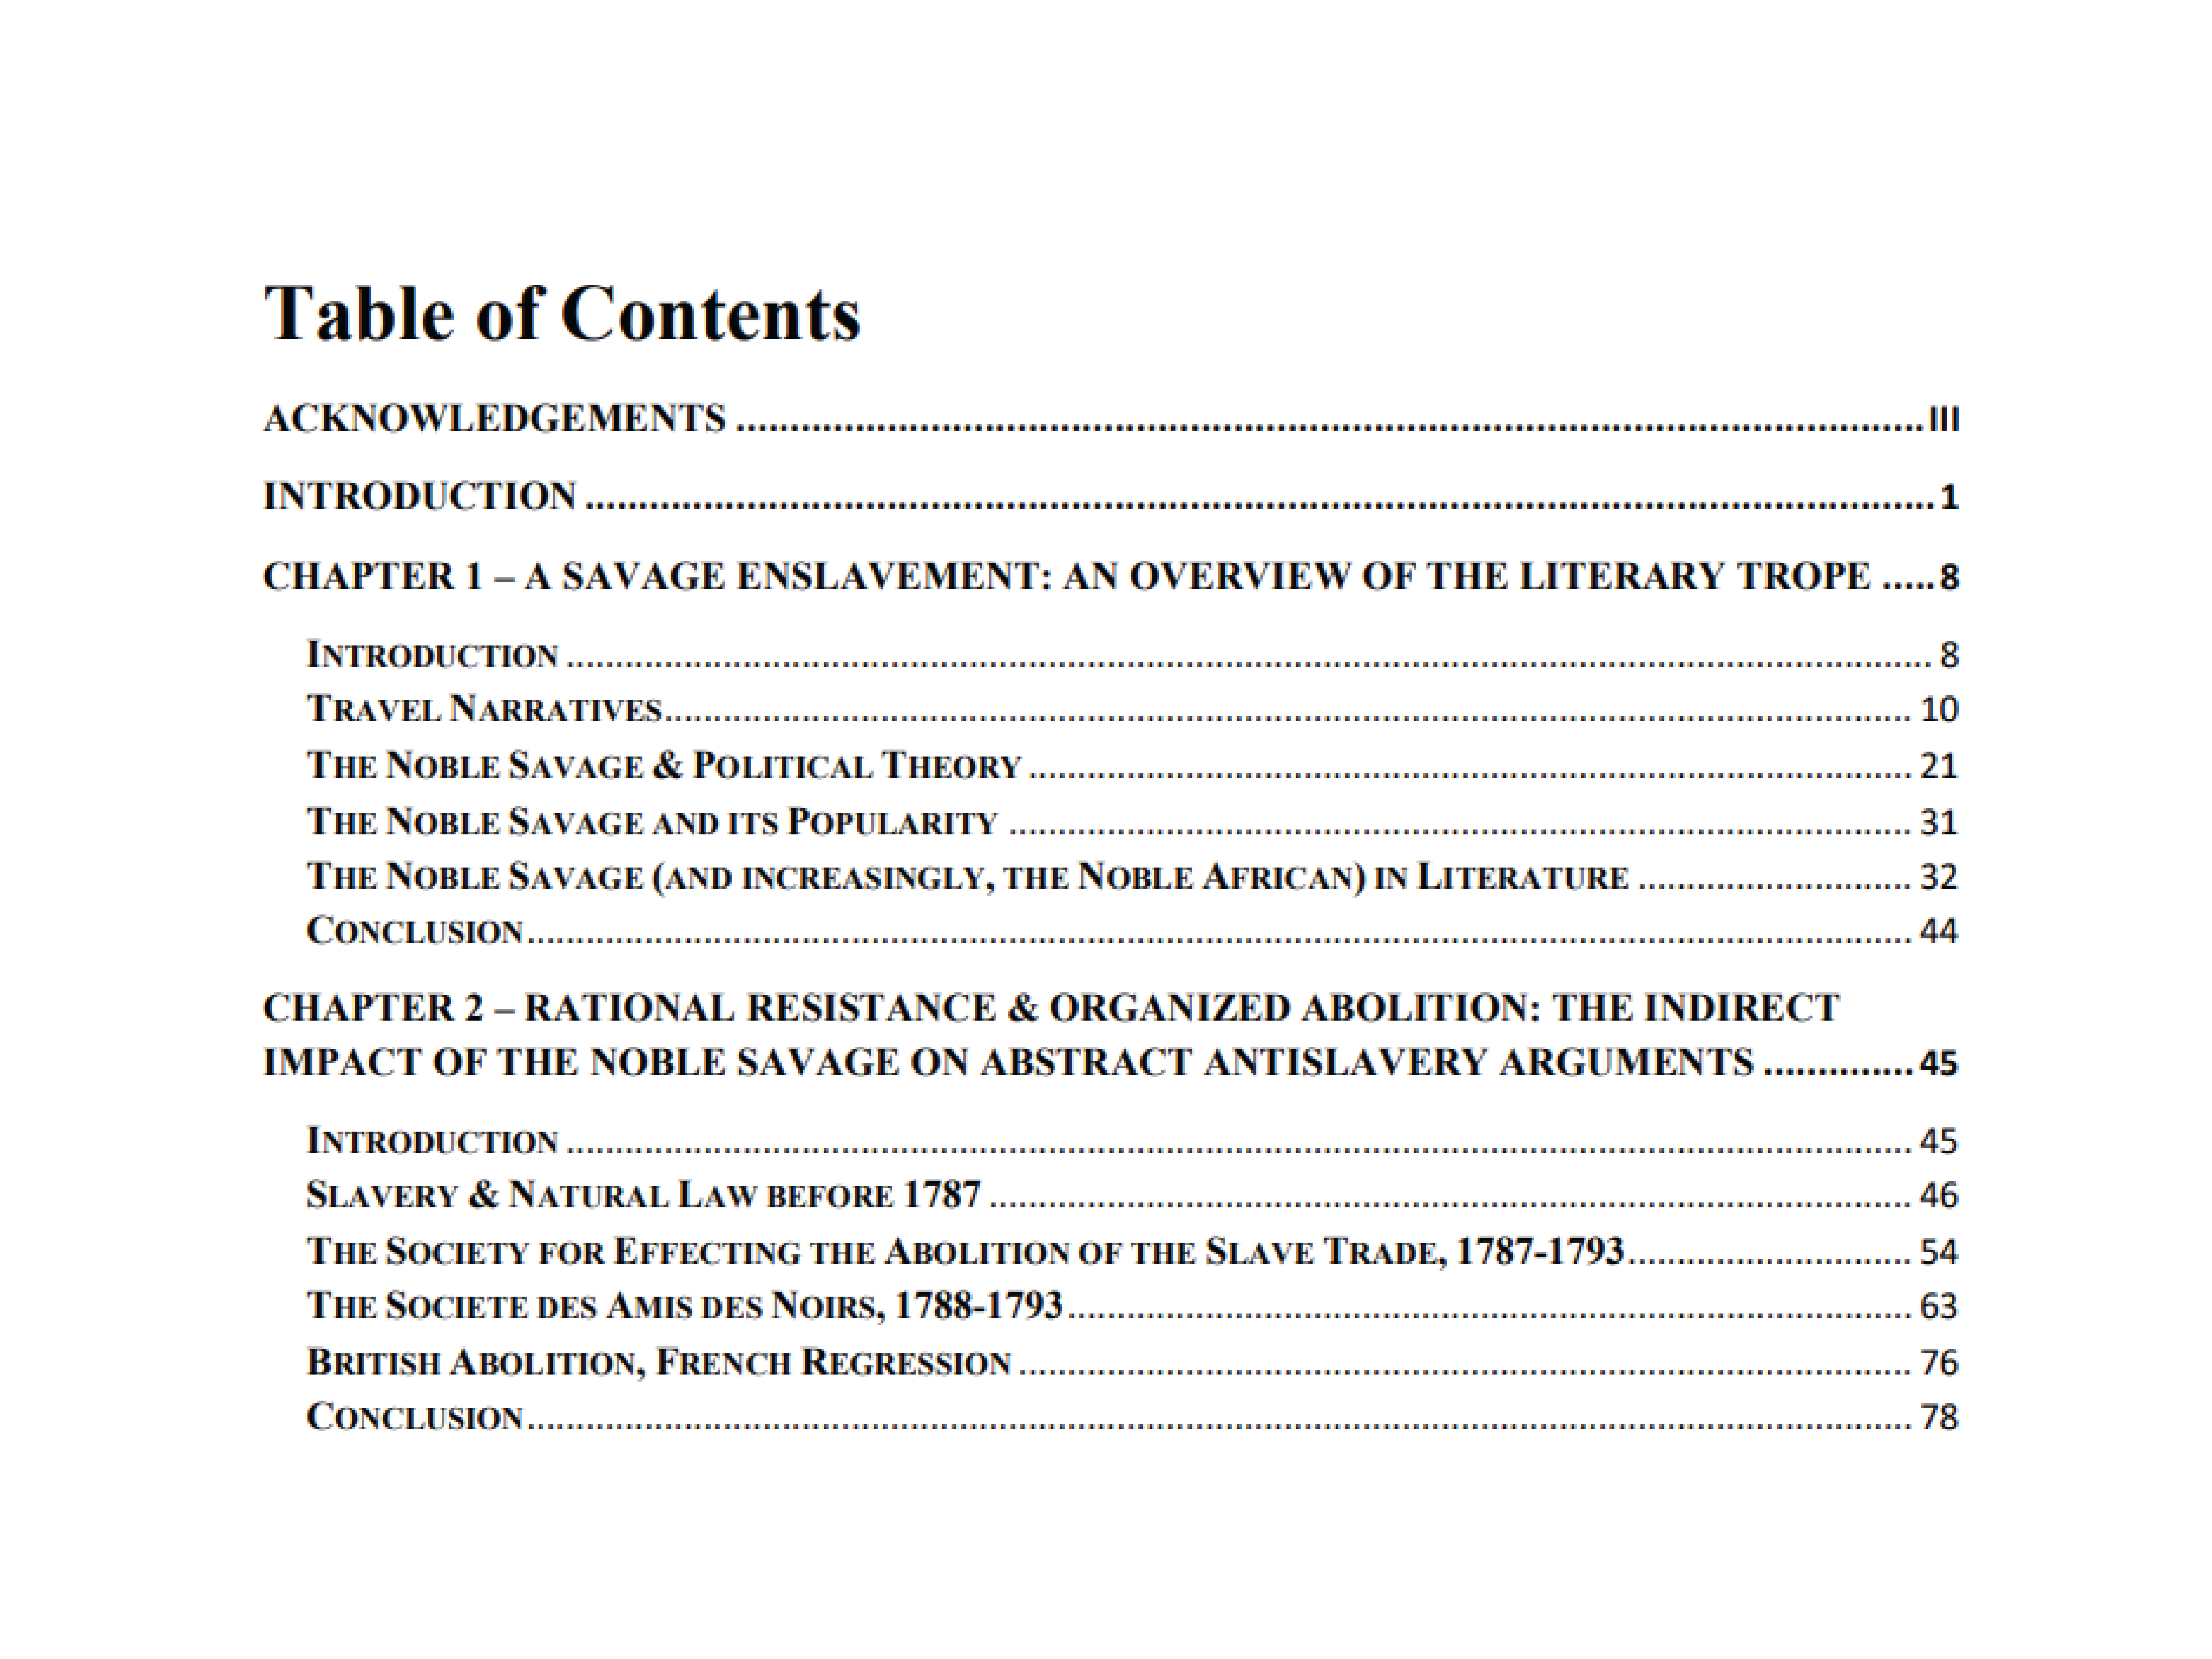 Table-of-contents-of-a-thesis